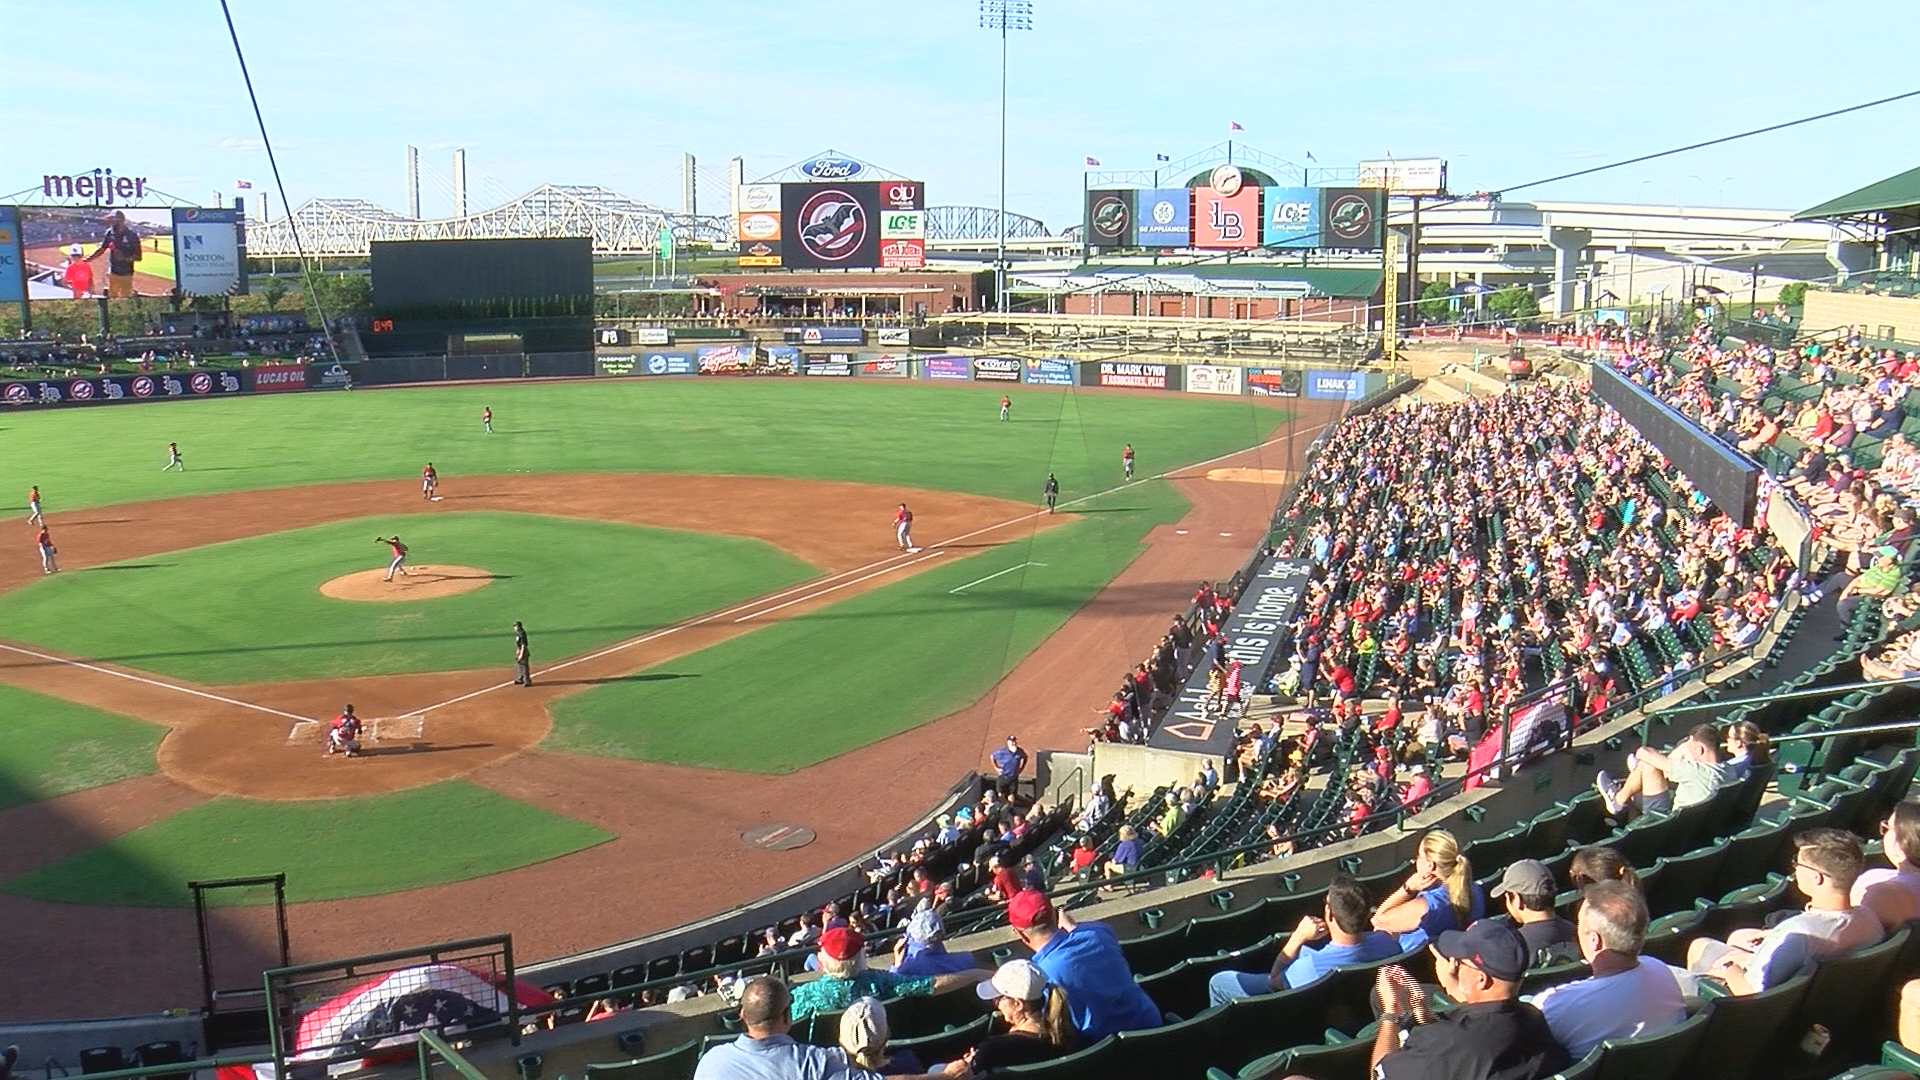 Enjoy 4 nights of fun with the Louisville Bats